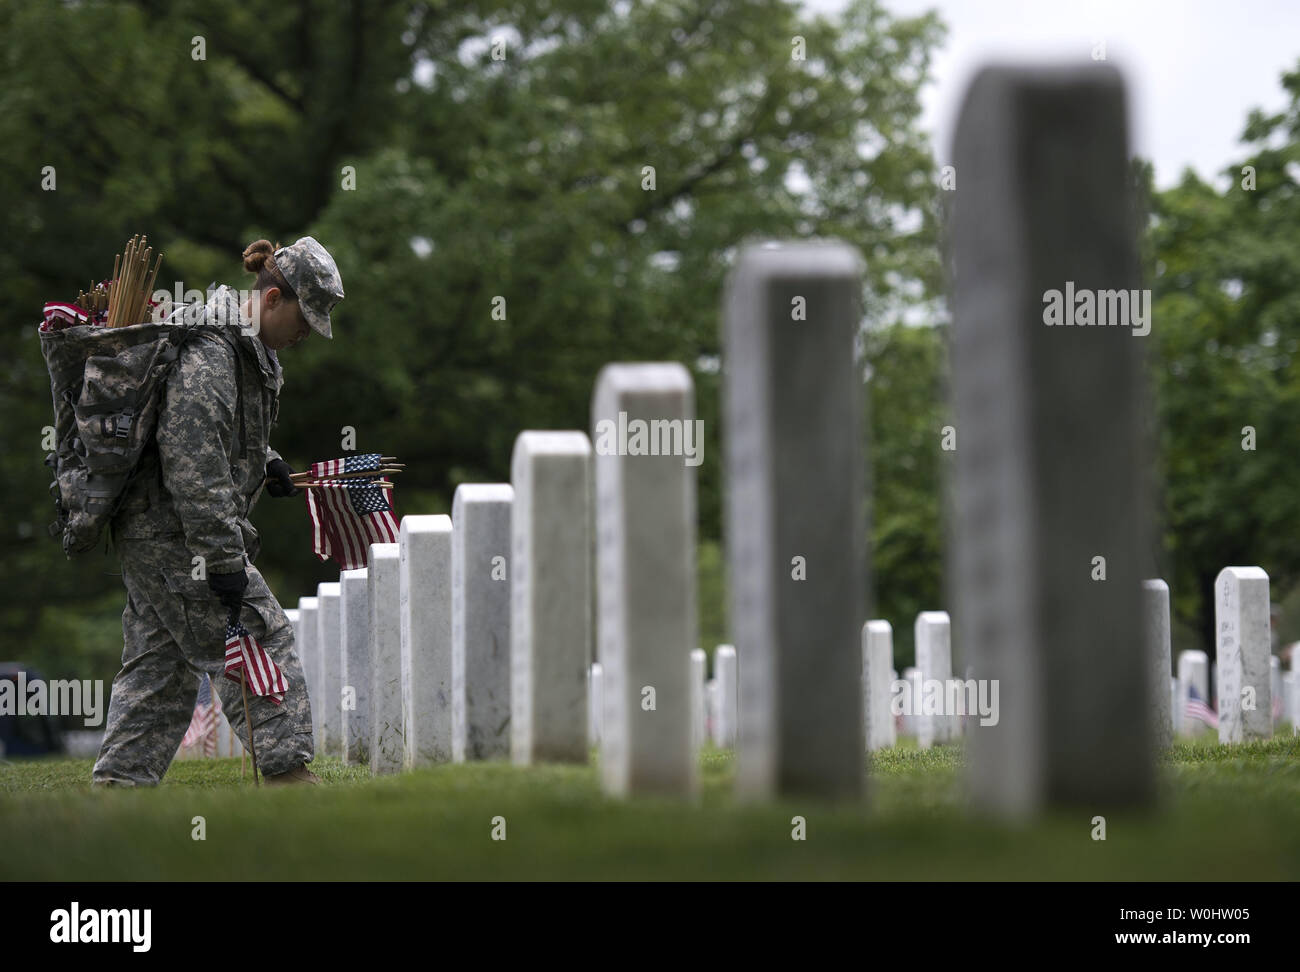 Army Staff Sgt. Robin Reed places a flag at a grave in Arlington National Cemetery during the Flags-In ceremony, in Arlington, Virginia on May 21, 2015. Members of the 3rd U.S. Infantry Regiment (The Old Guard) placed an American flag all of the over 228,000 headstones at Arlington in honor of Memorial Day. Photo by Kevin Dietsch/UPI Stock Photo